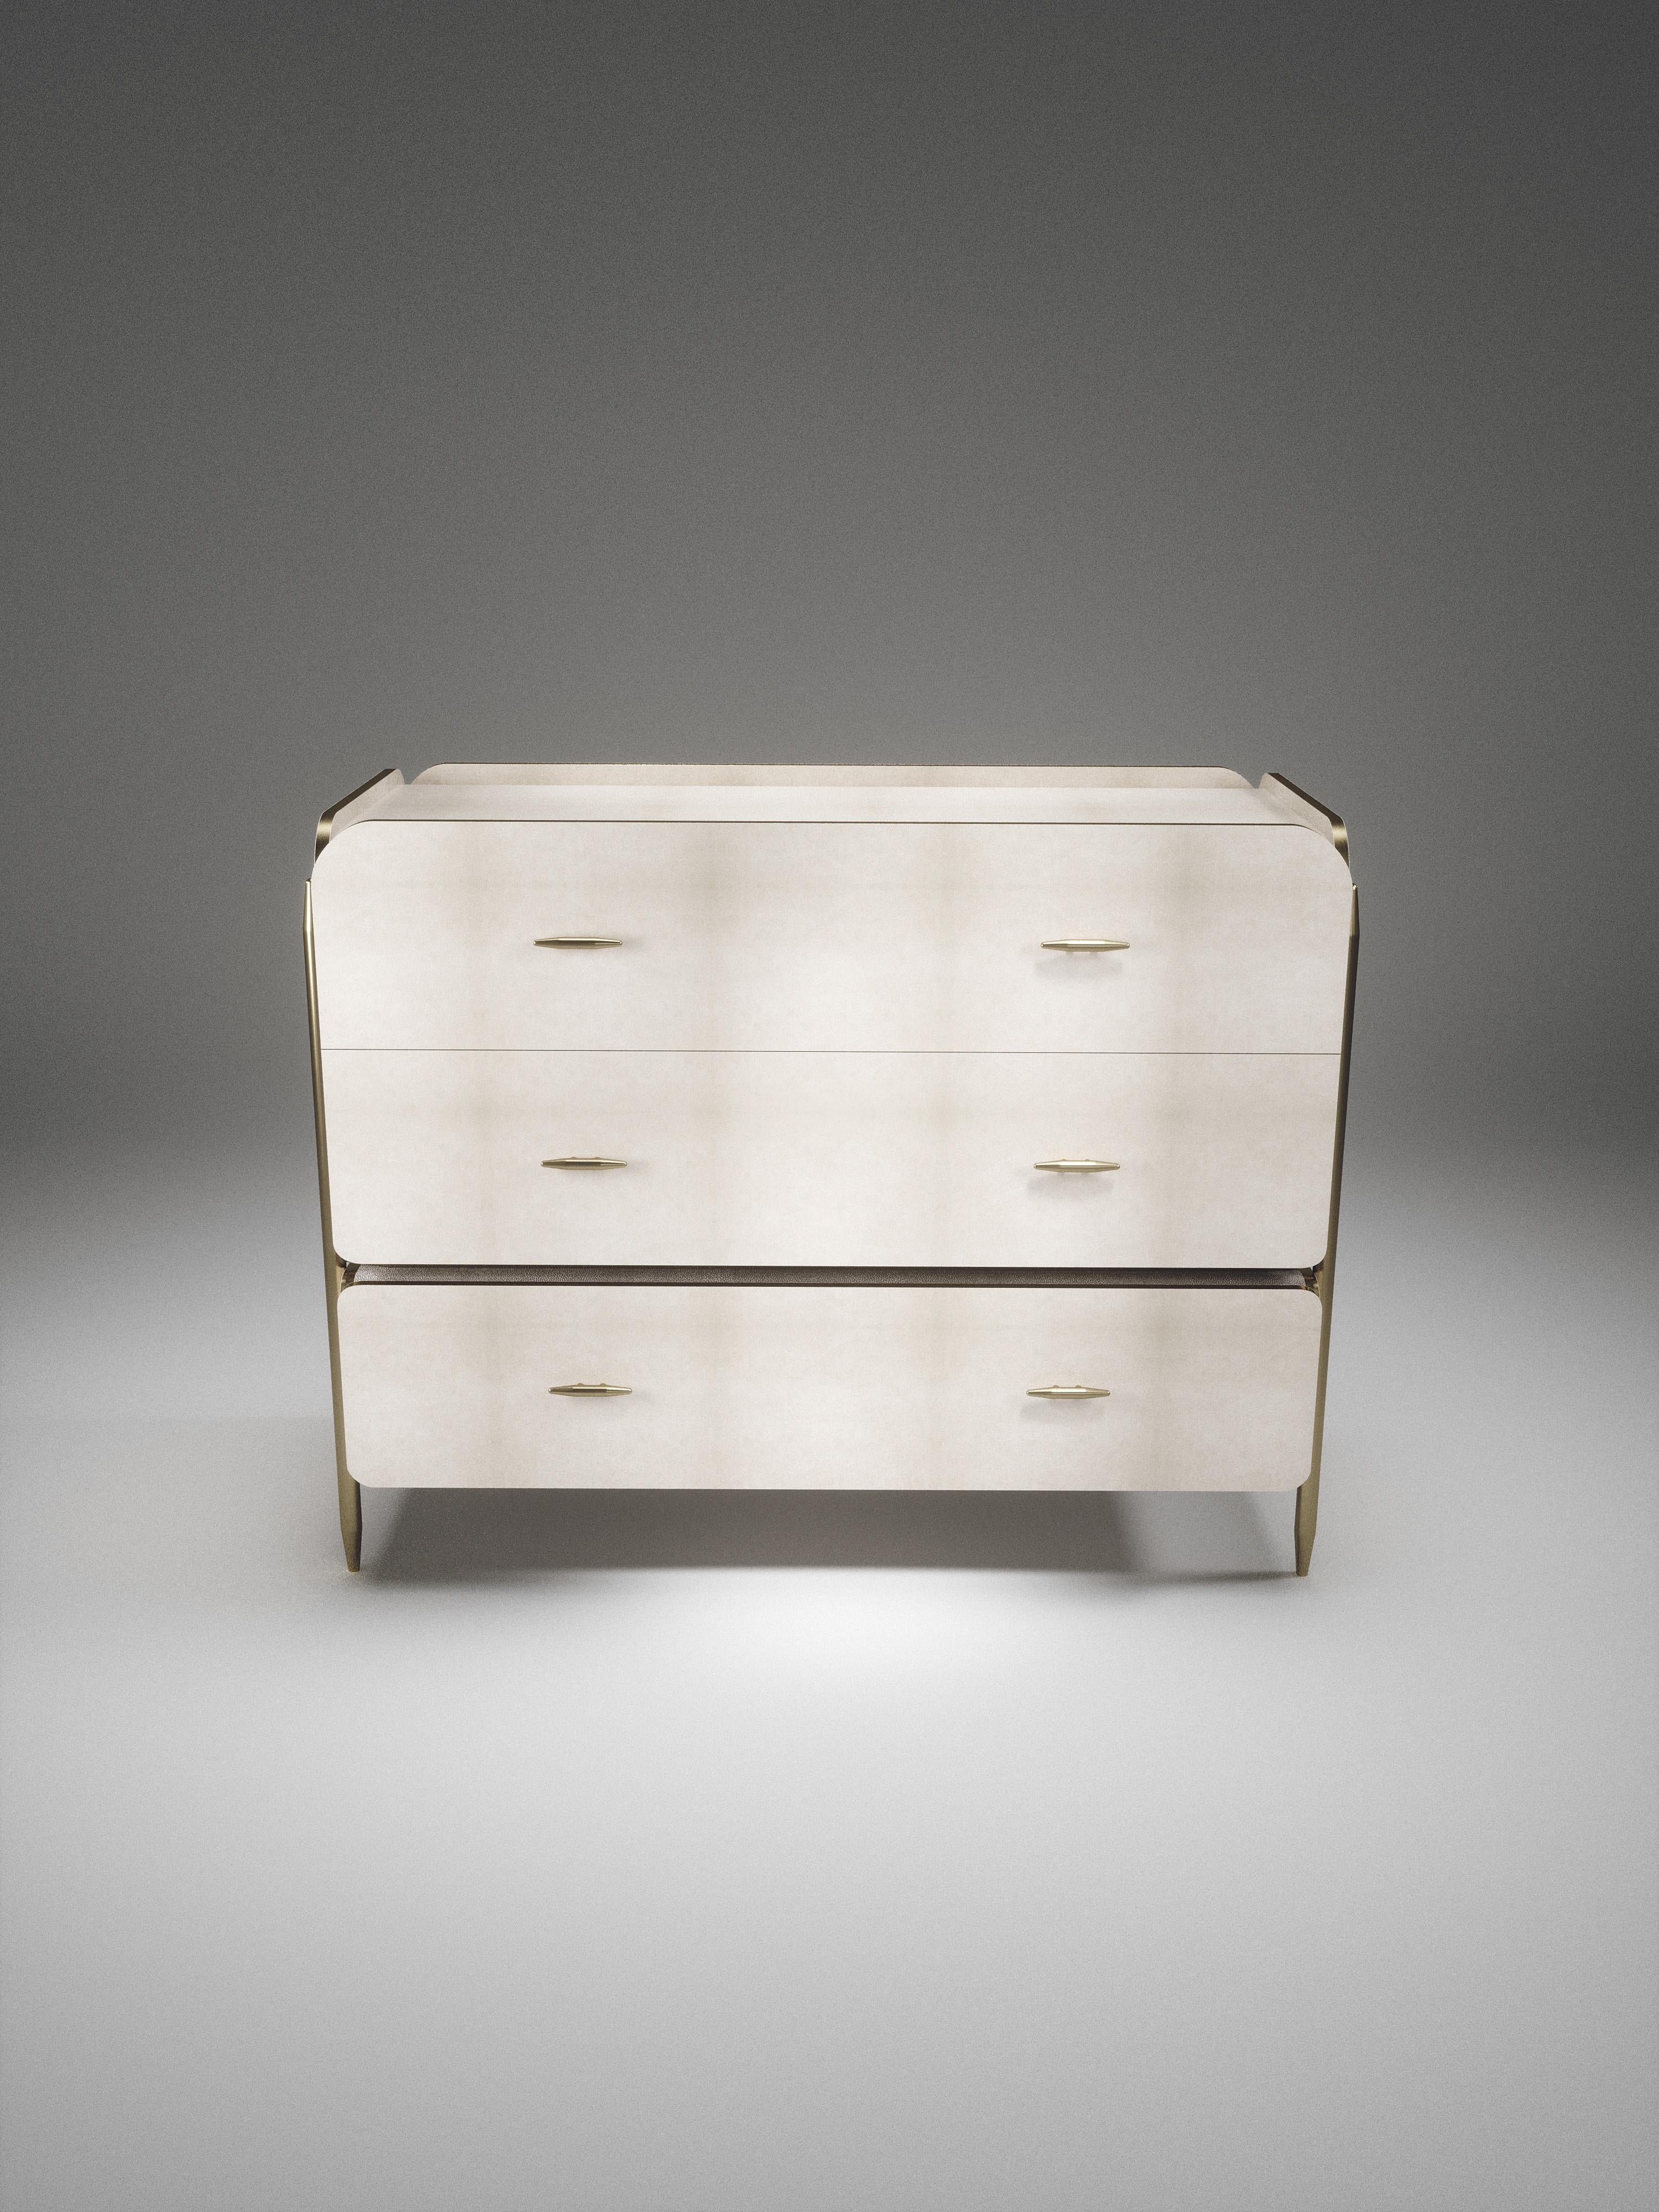 The Dandy rectangle chest of drawers by Kifu Paris is an elegant and a luxurious home accent, inlaid in cream parchment with bronze-patina brass details. This piece includes 3 drawers total and the interiors are inlaid in gemelina wood veneer. The